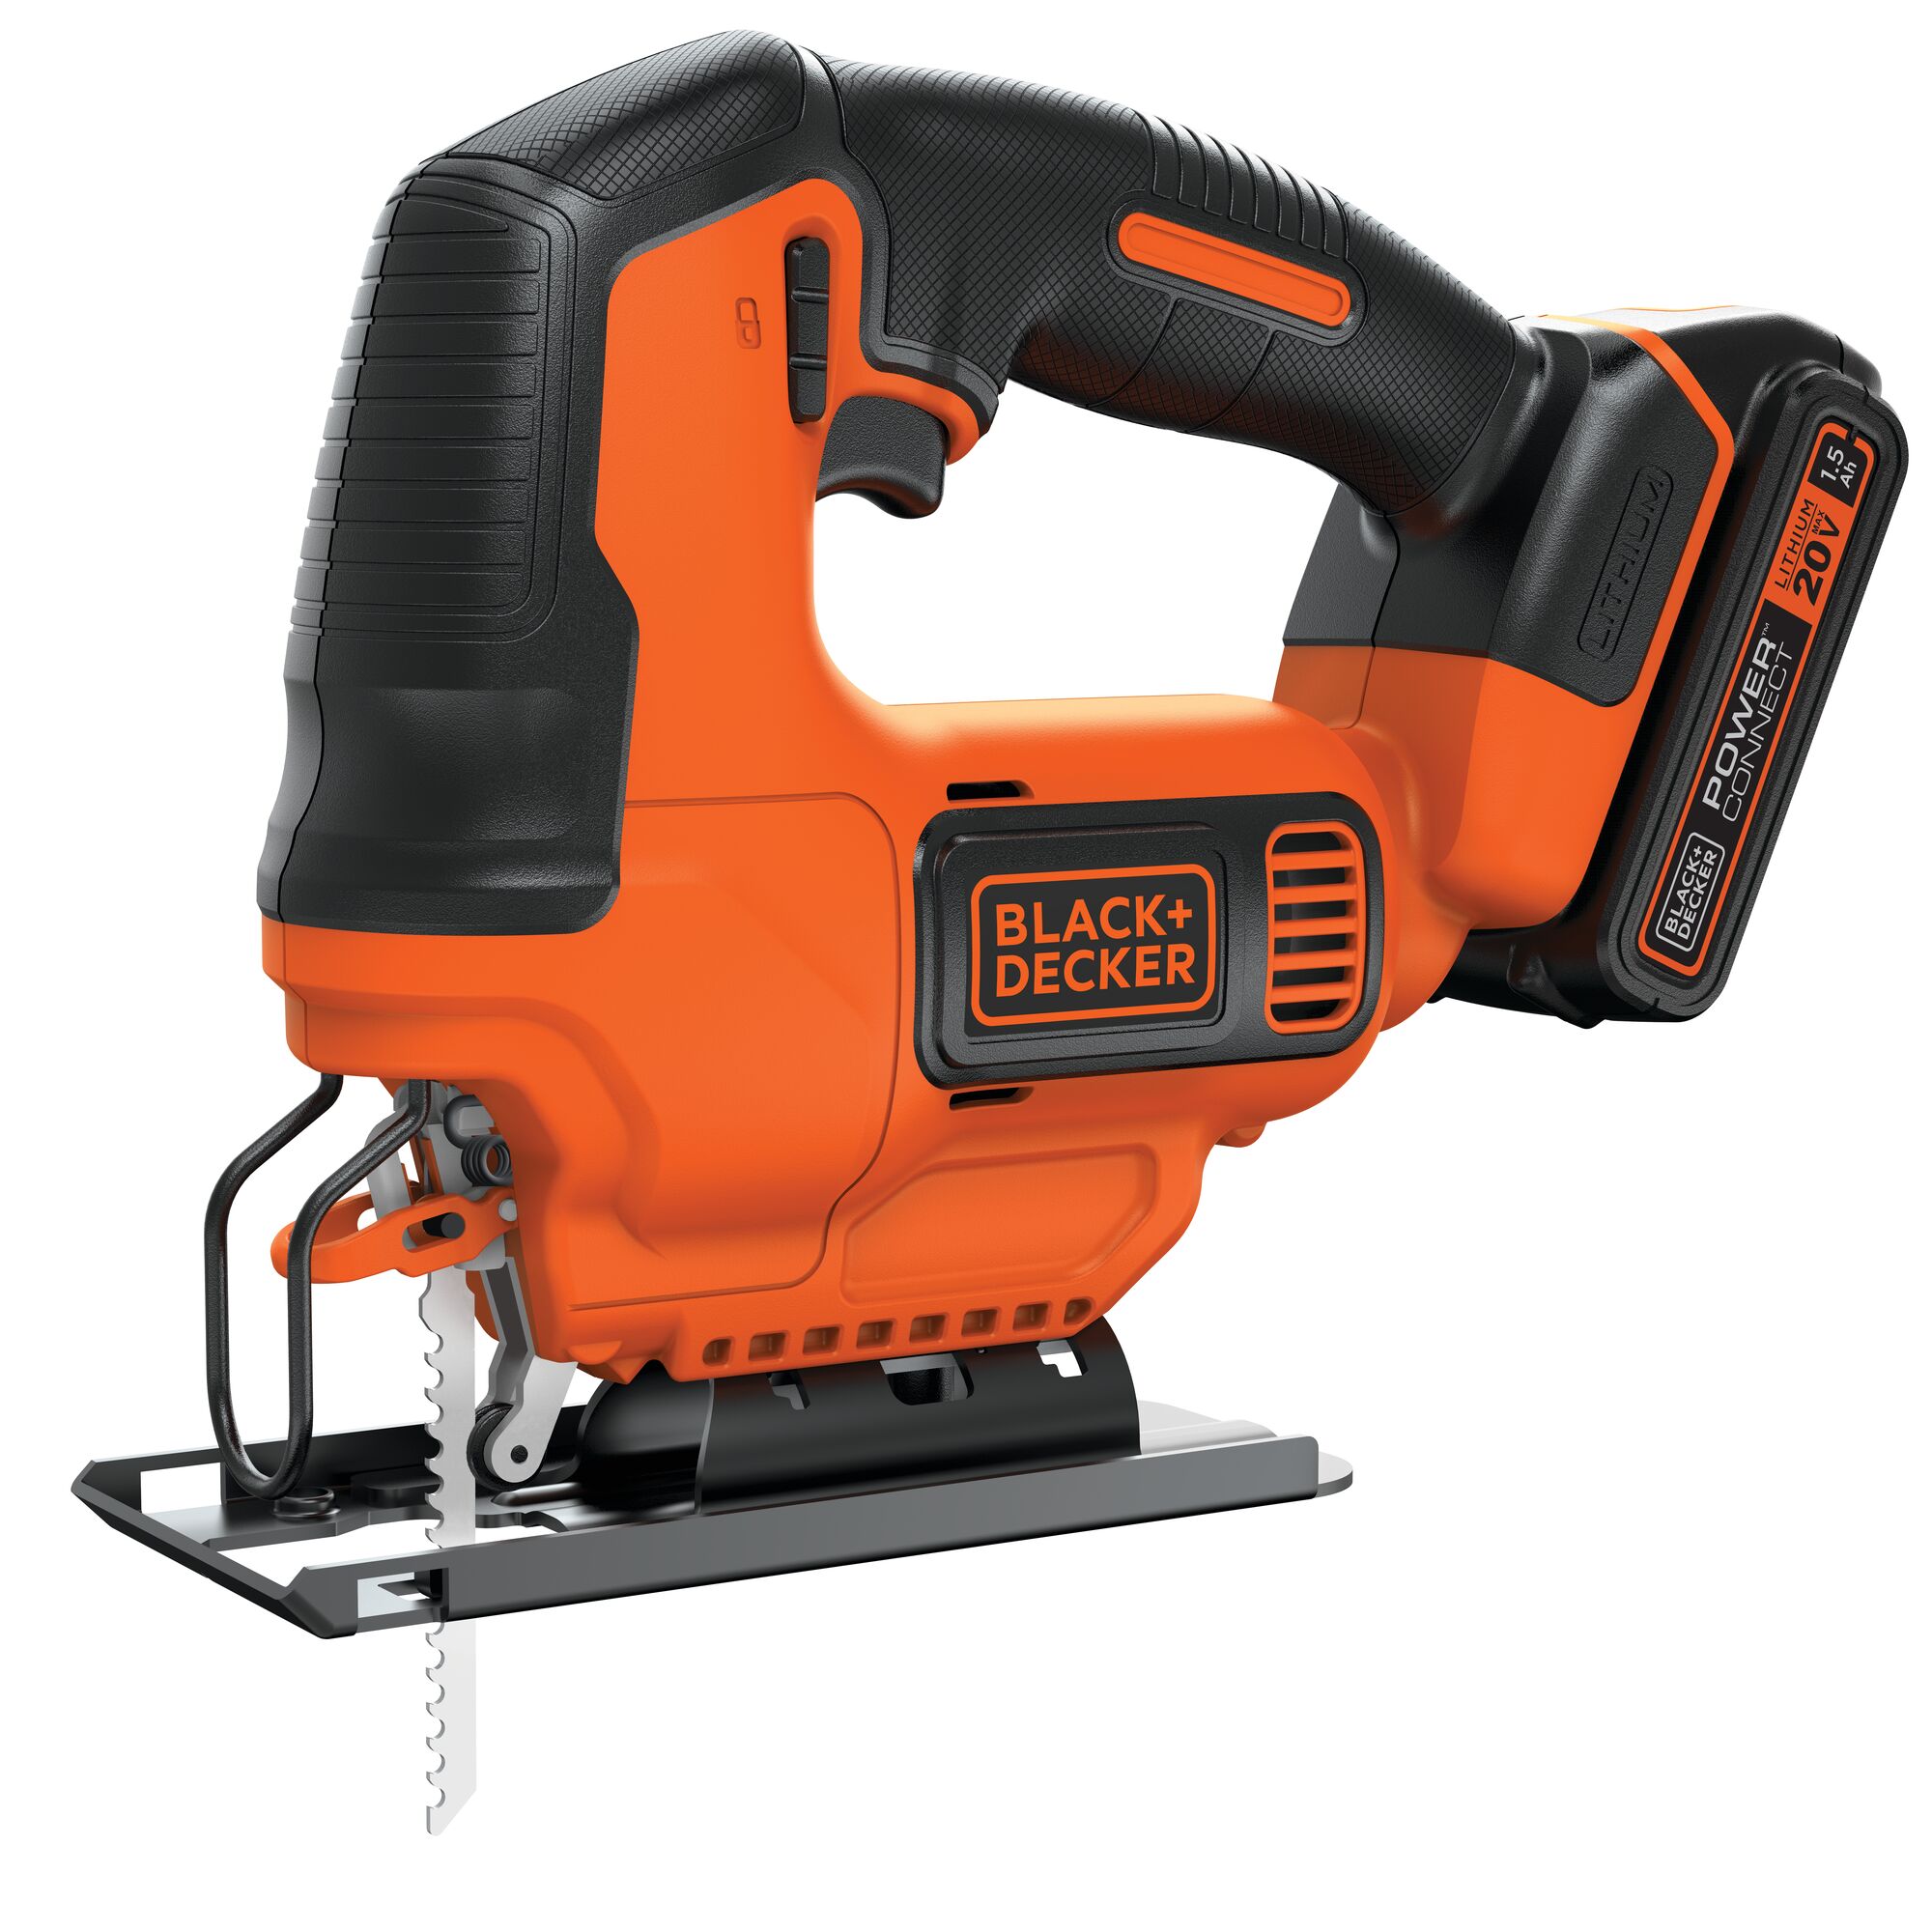 Profile of Black and Decker 20 volt max cordless jigsaw.